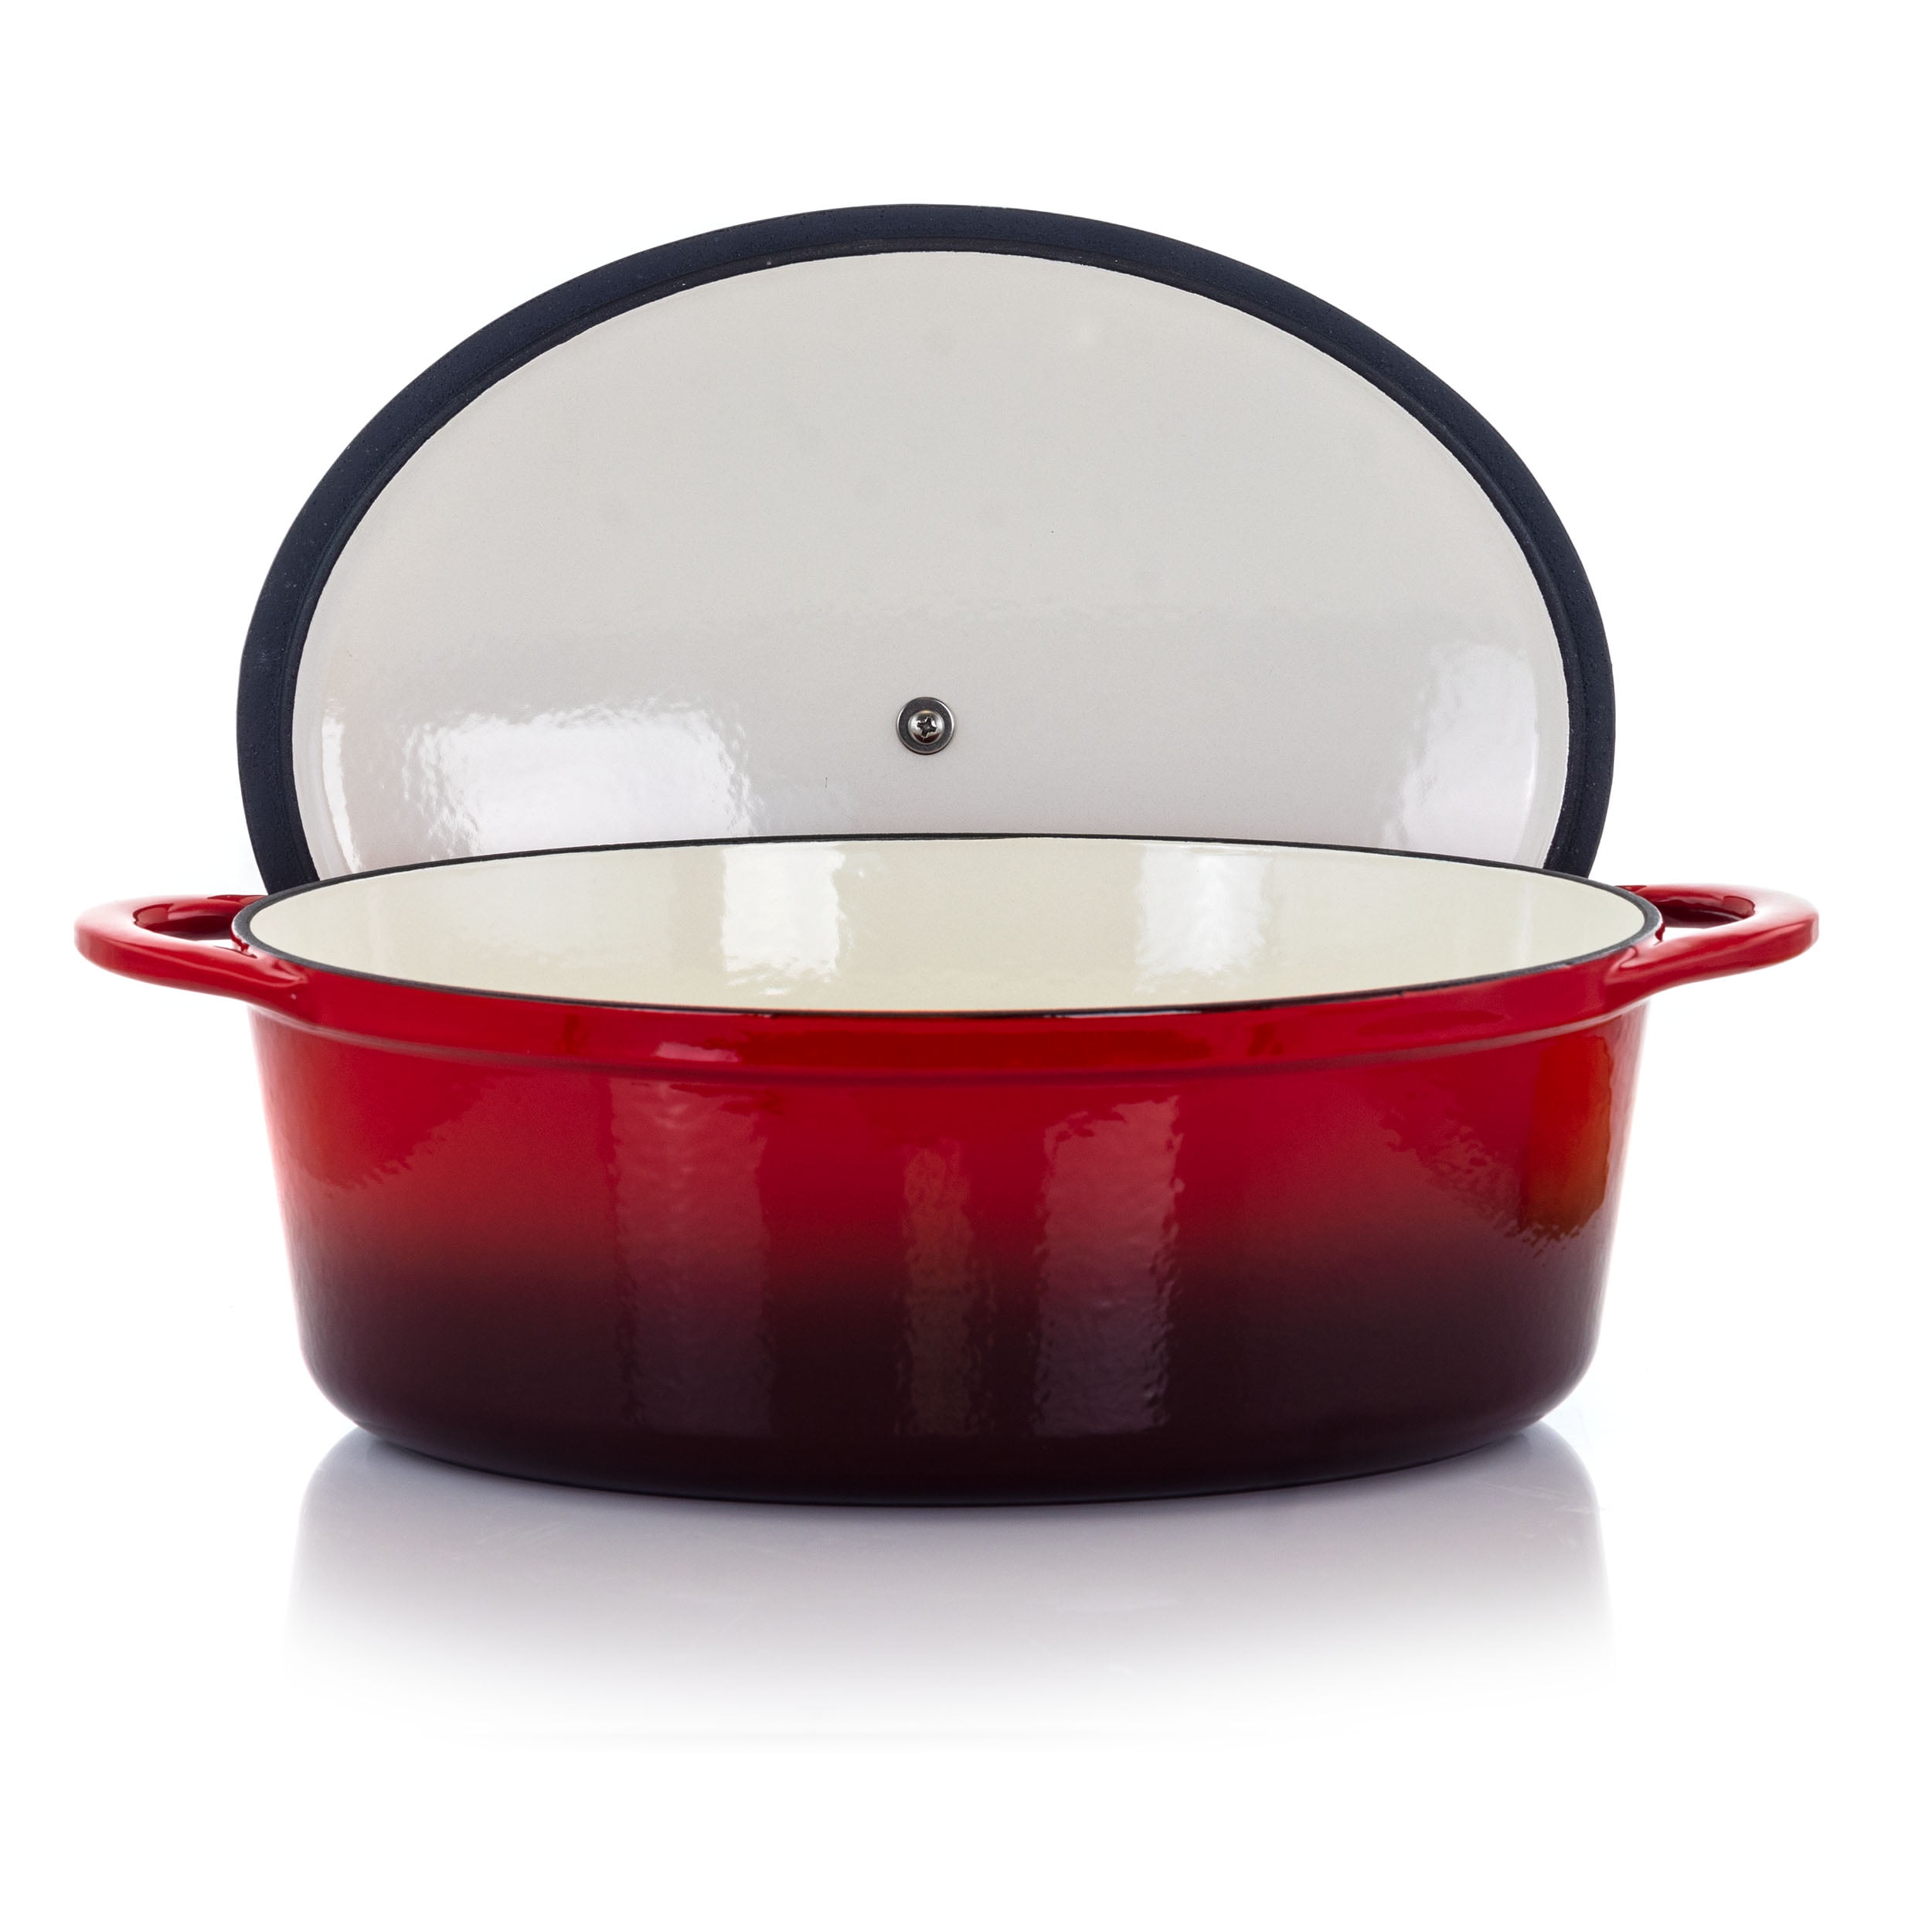 Restaurantware 9 Ounce Mini Casserole Dish, 1 Mini Dutch Oven with Lid - Enameled, Oval, Red Cast Iron Mini Cocotte, Heavy-Duty, for Baking